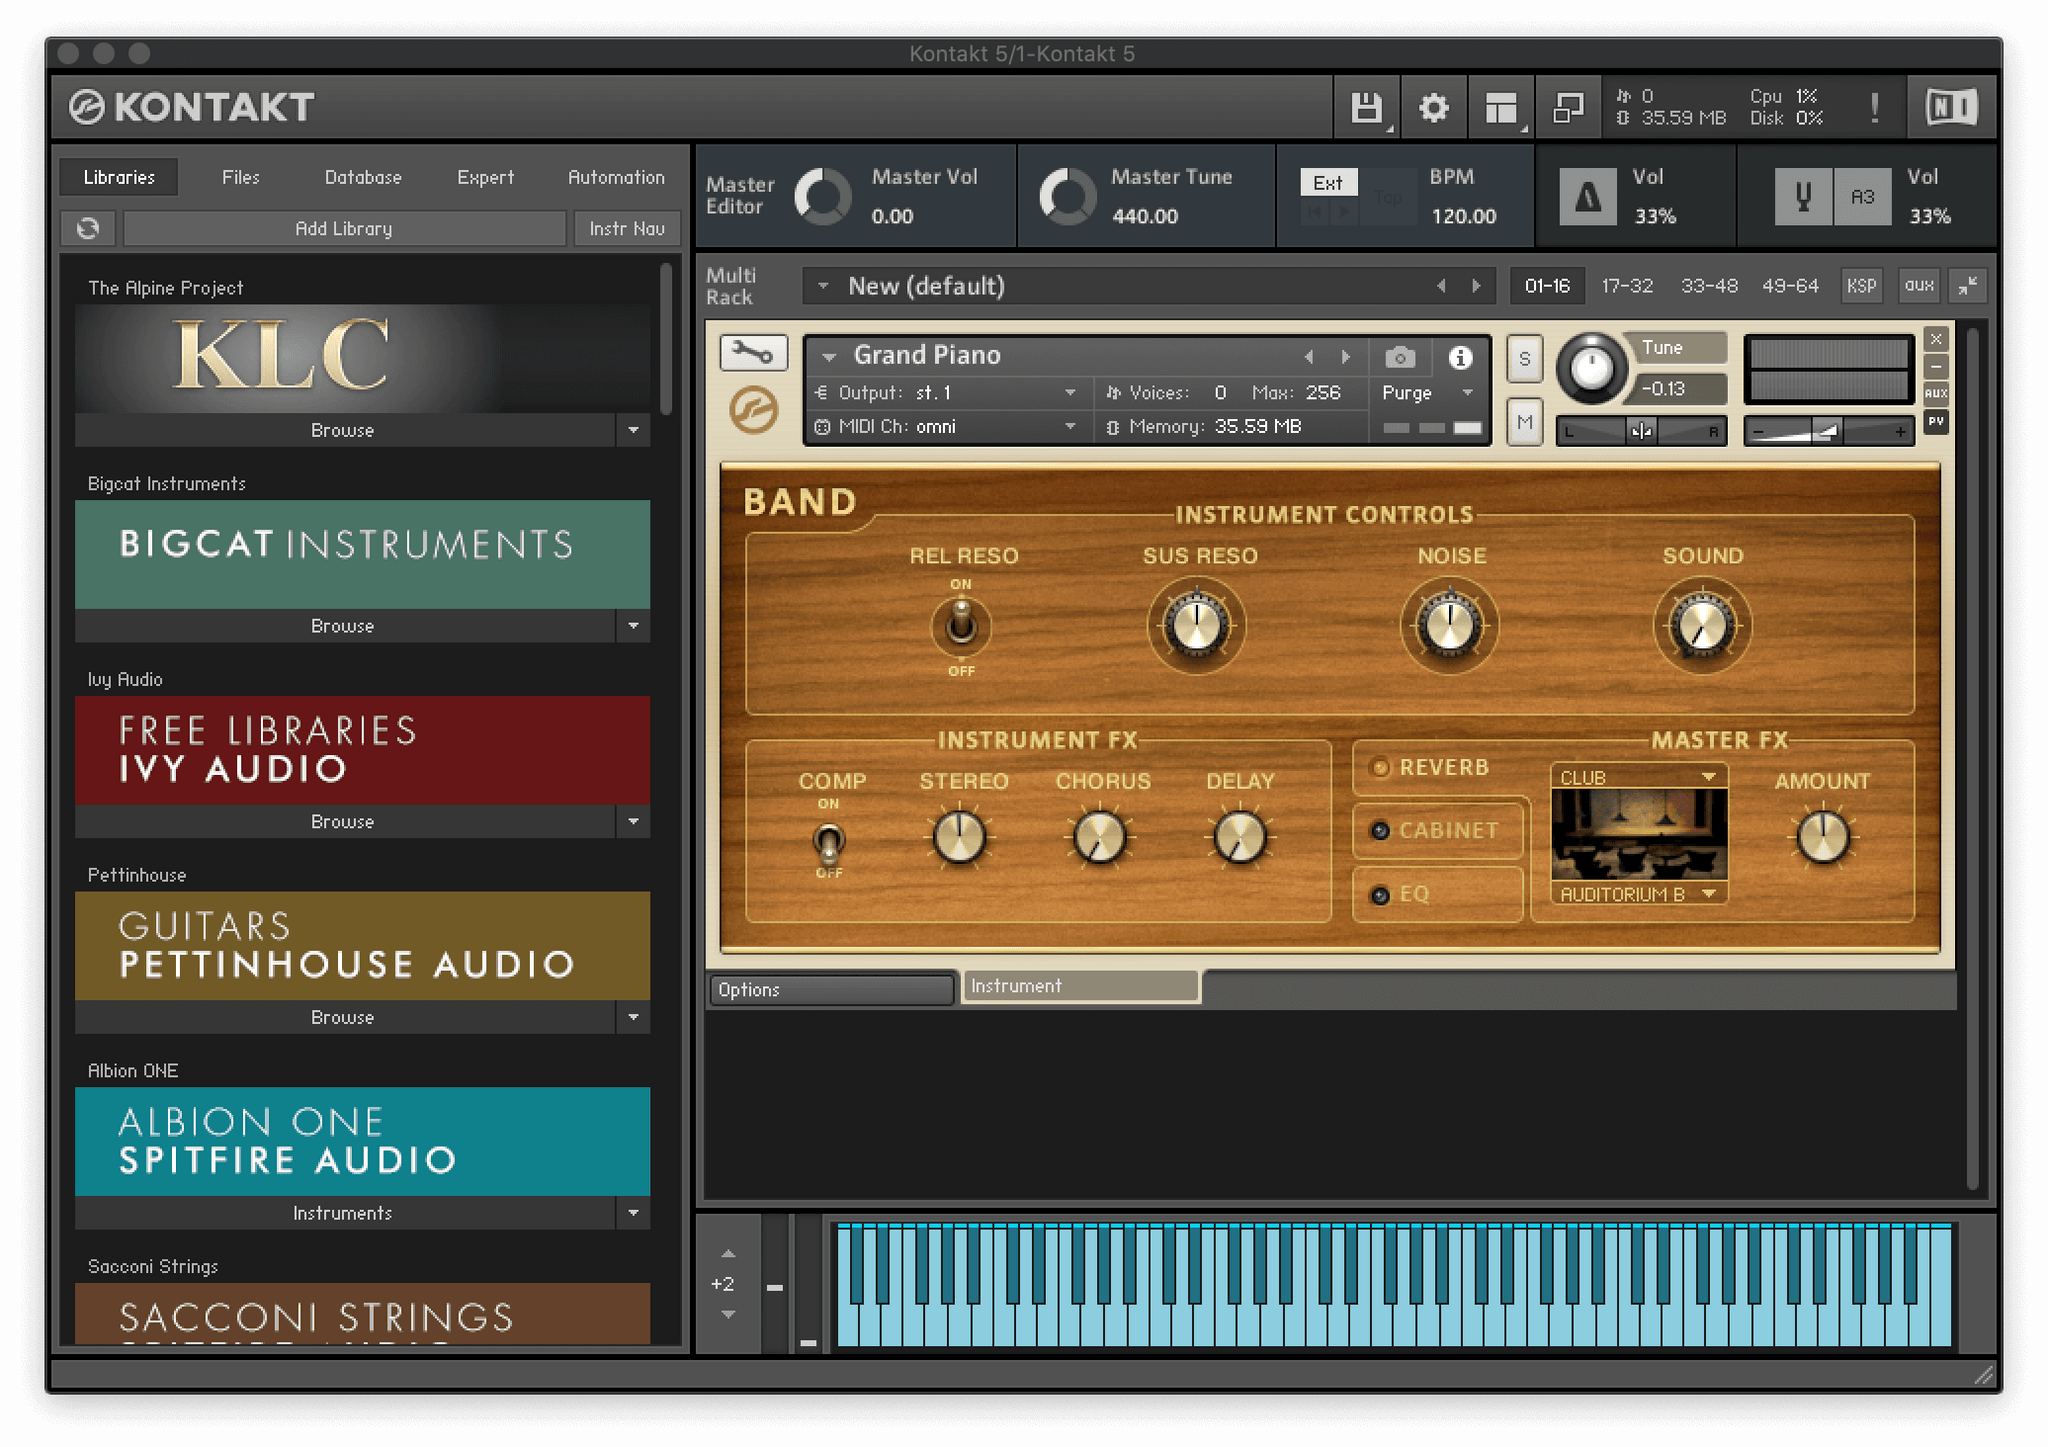 kontakt factory library synth